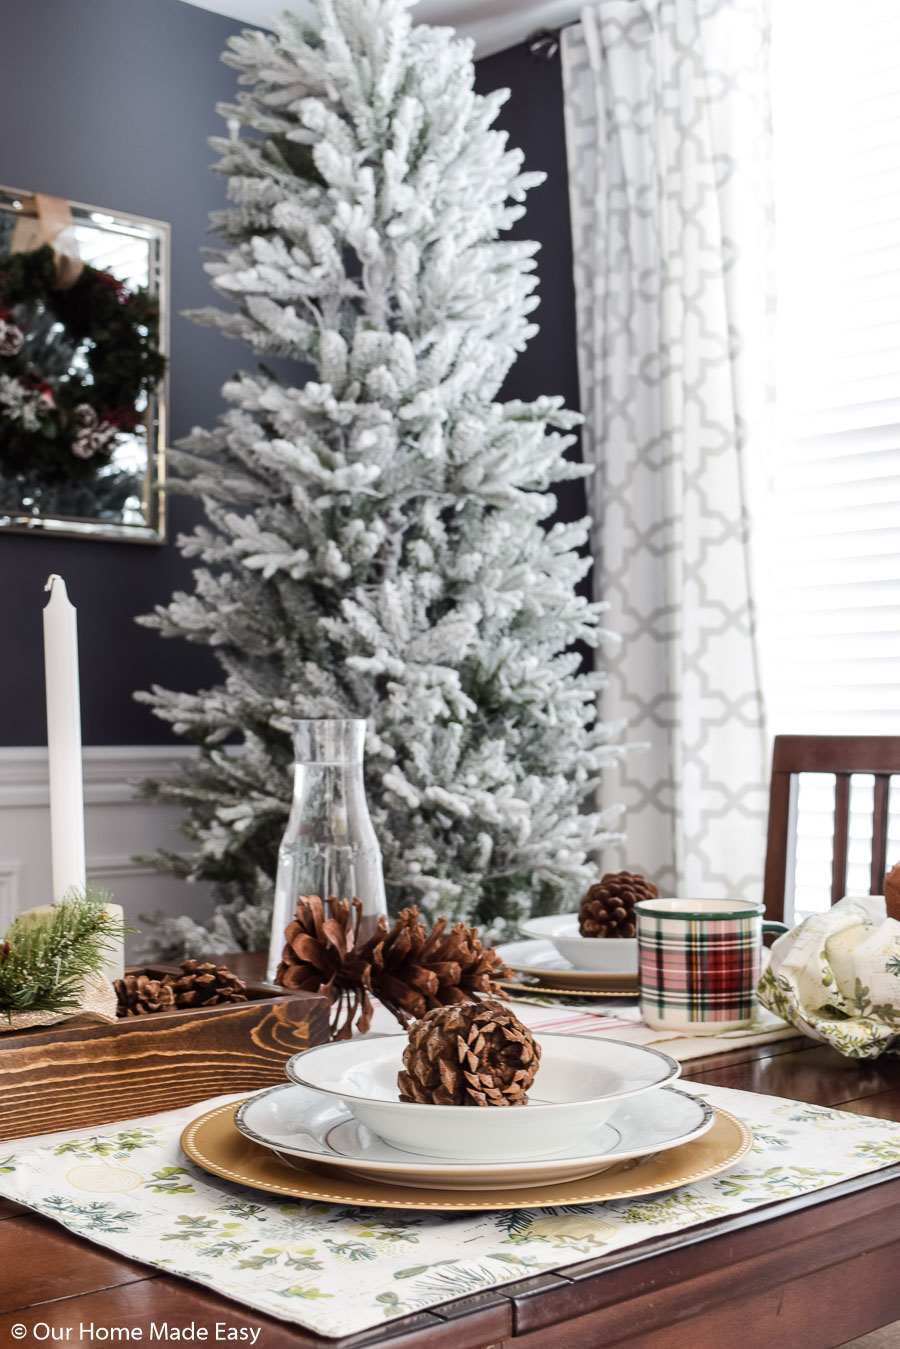 A Christmas tablescape doesn't have to be busy and overwhelming--simple is best!